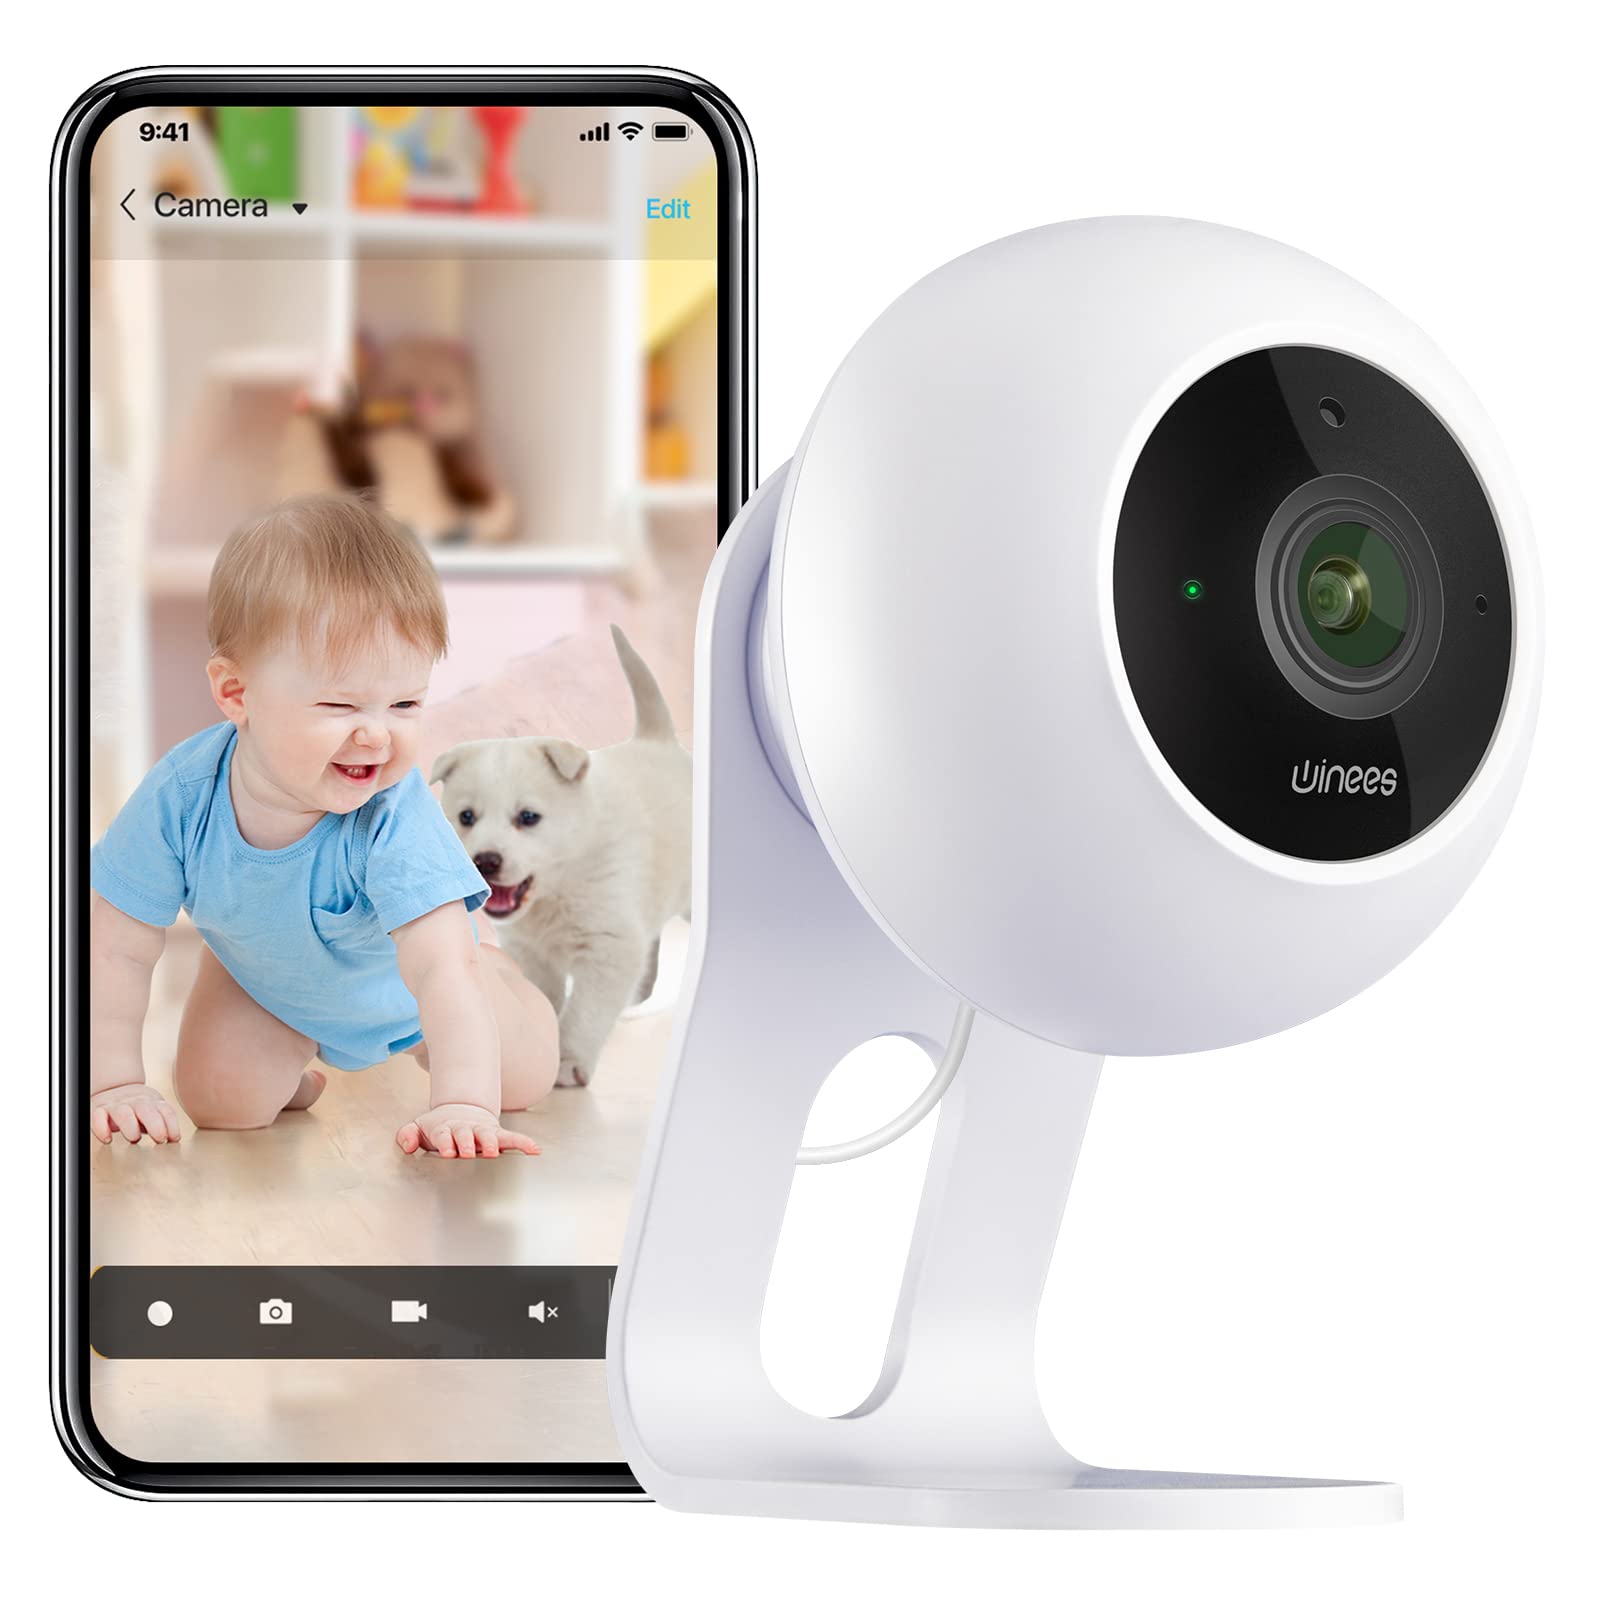 Winees Baby Monitor Mini Indoor Cam, Smart WiFi Security Camera 1080P Nanny and Pet Monitor with Night Vision, Two-Way Audio, Motion Detection, App Control,Multifunctional Portable, 2.4 GHz WiFi Only